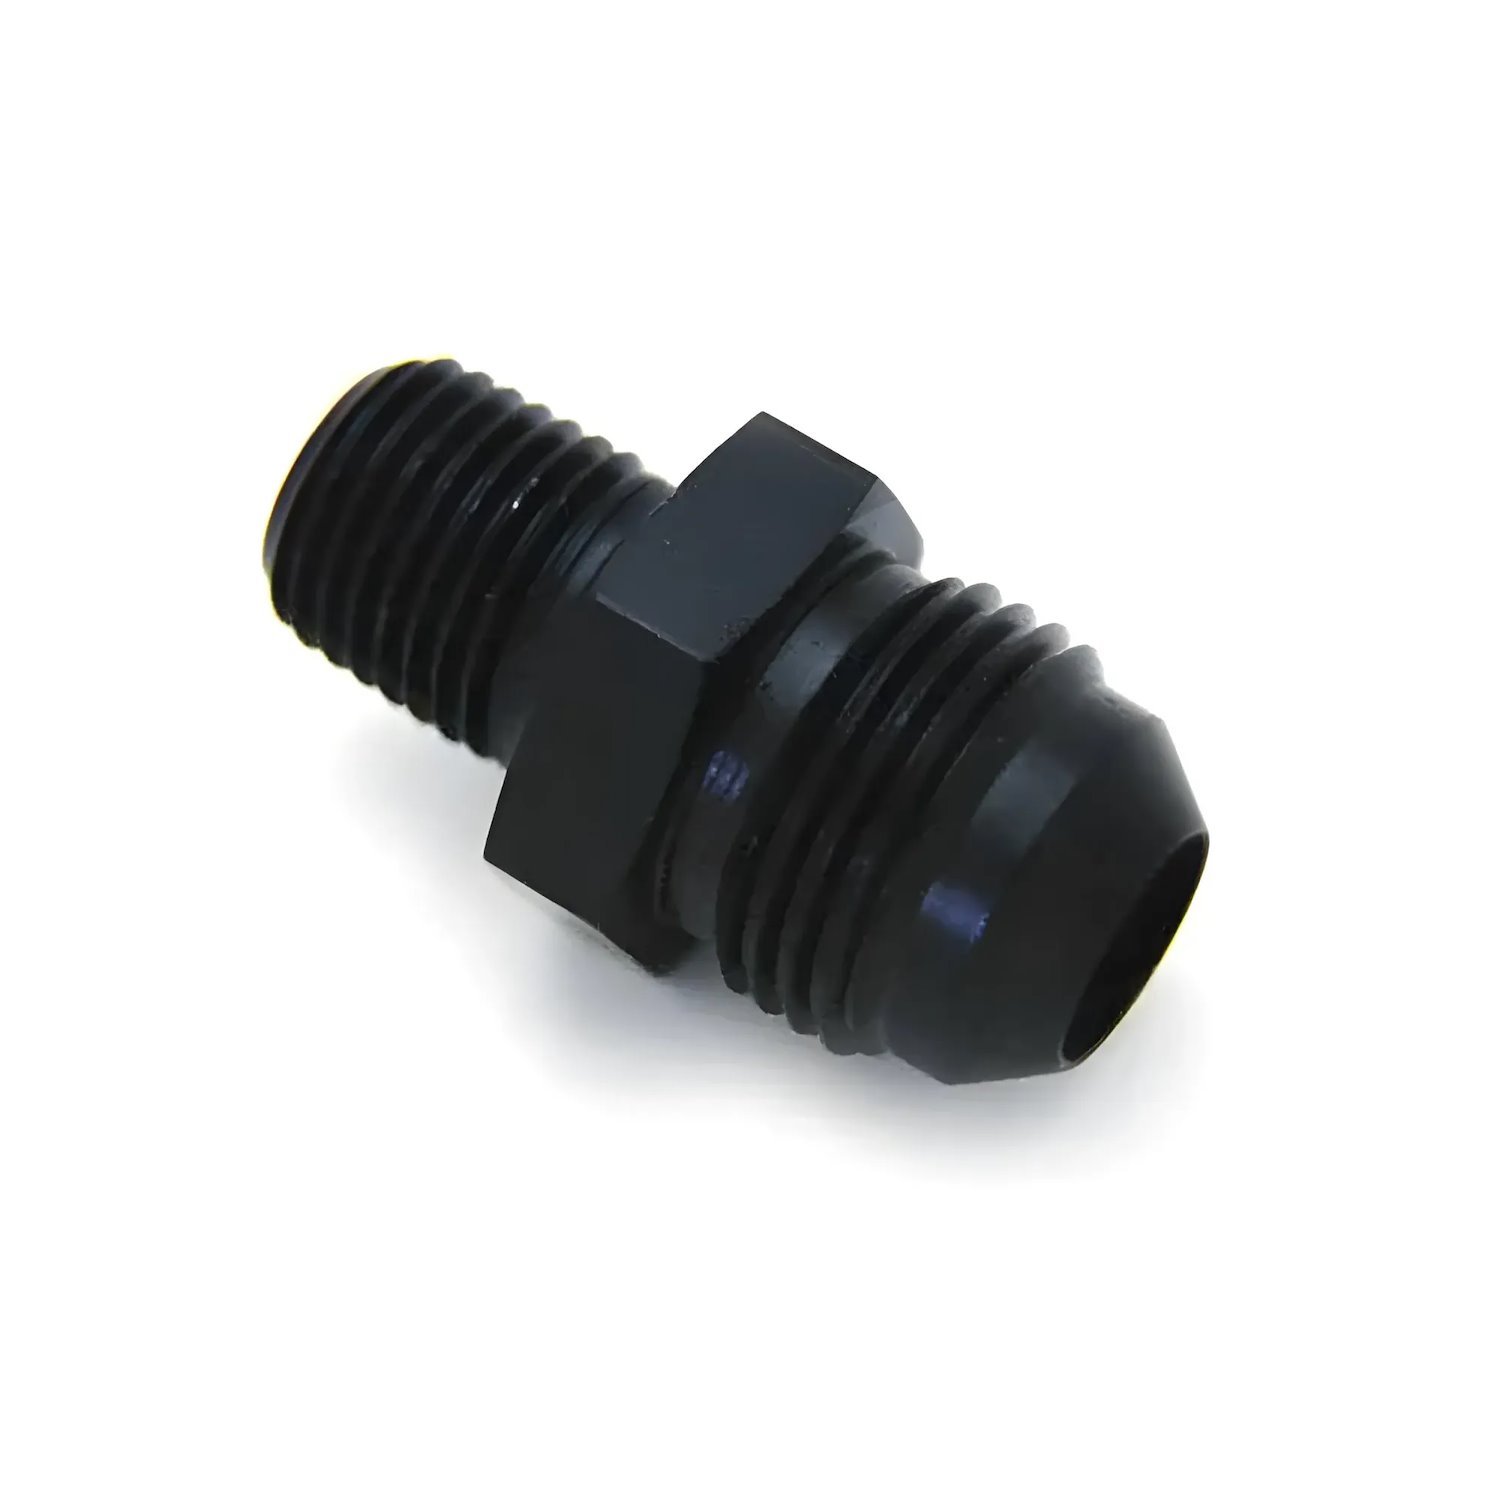 00-01157 1/4 in. NPT x 8AN Straight Fitting- Male/Male, Black